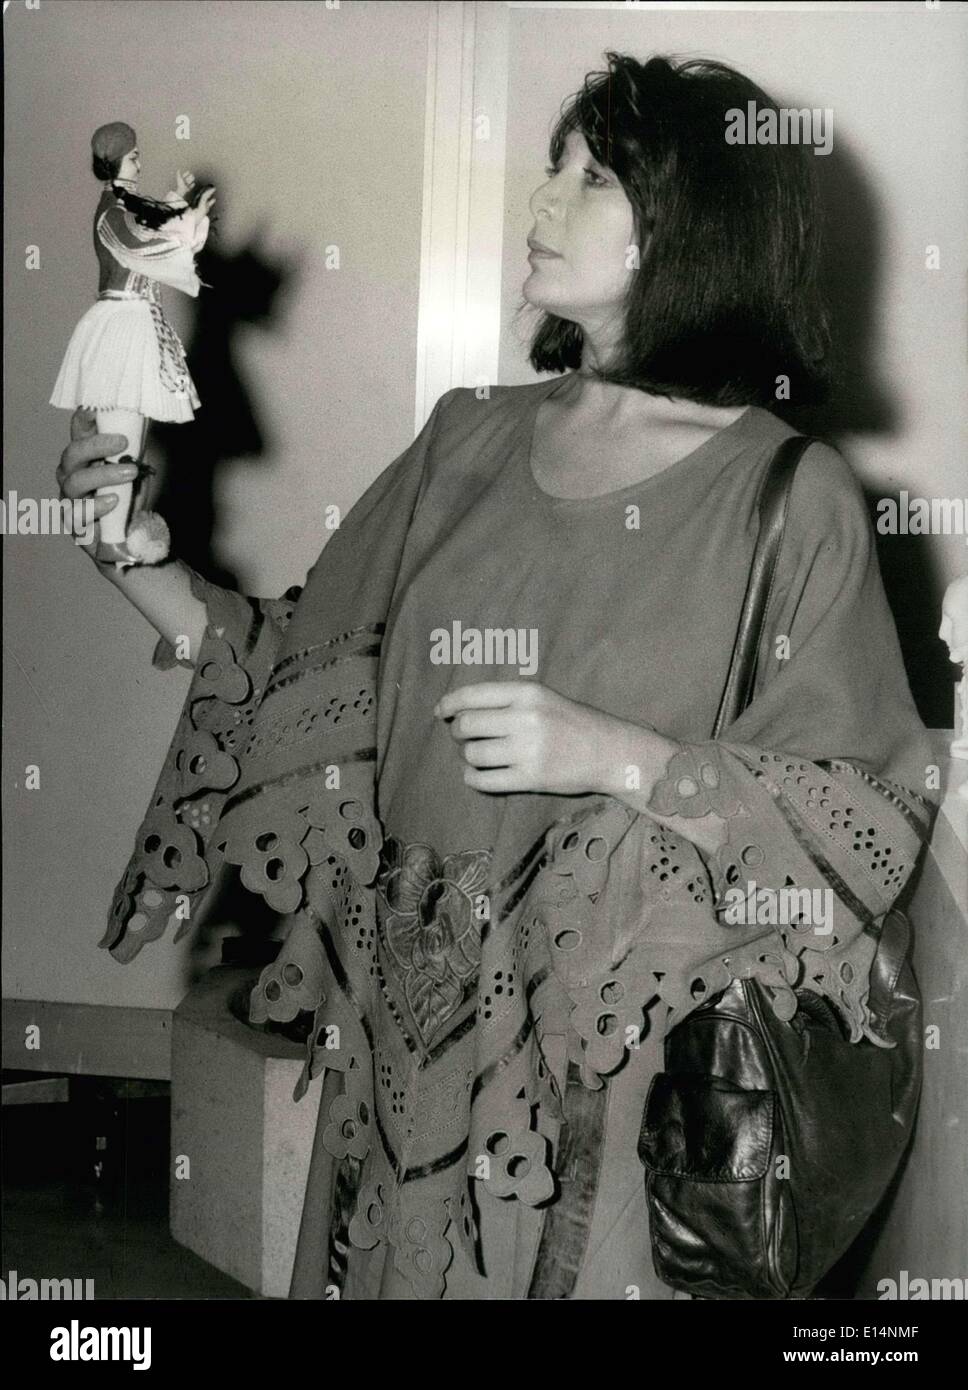 Apr. 09, 2012 - 1994 Press Photo French Actress and Chanson Singer Juliette Greco in Greece ne Pictures U Stock Photo